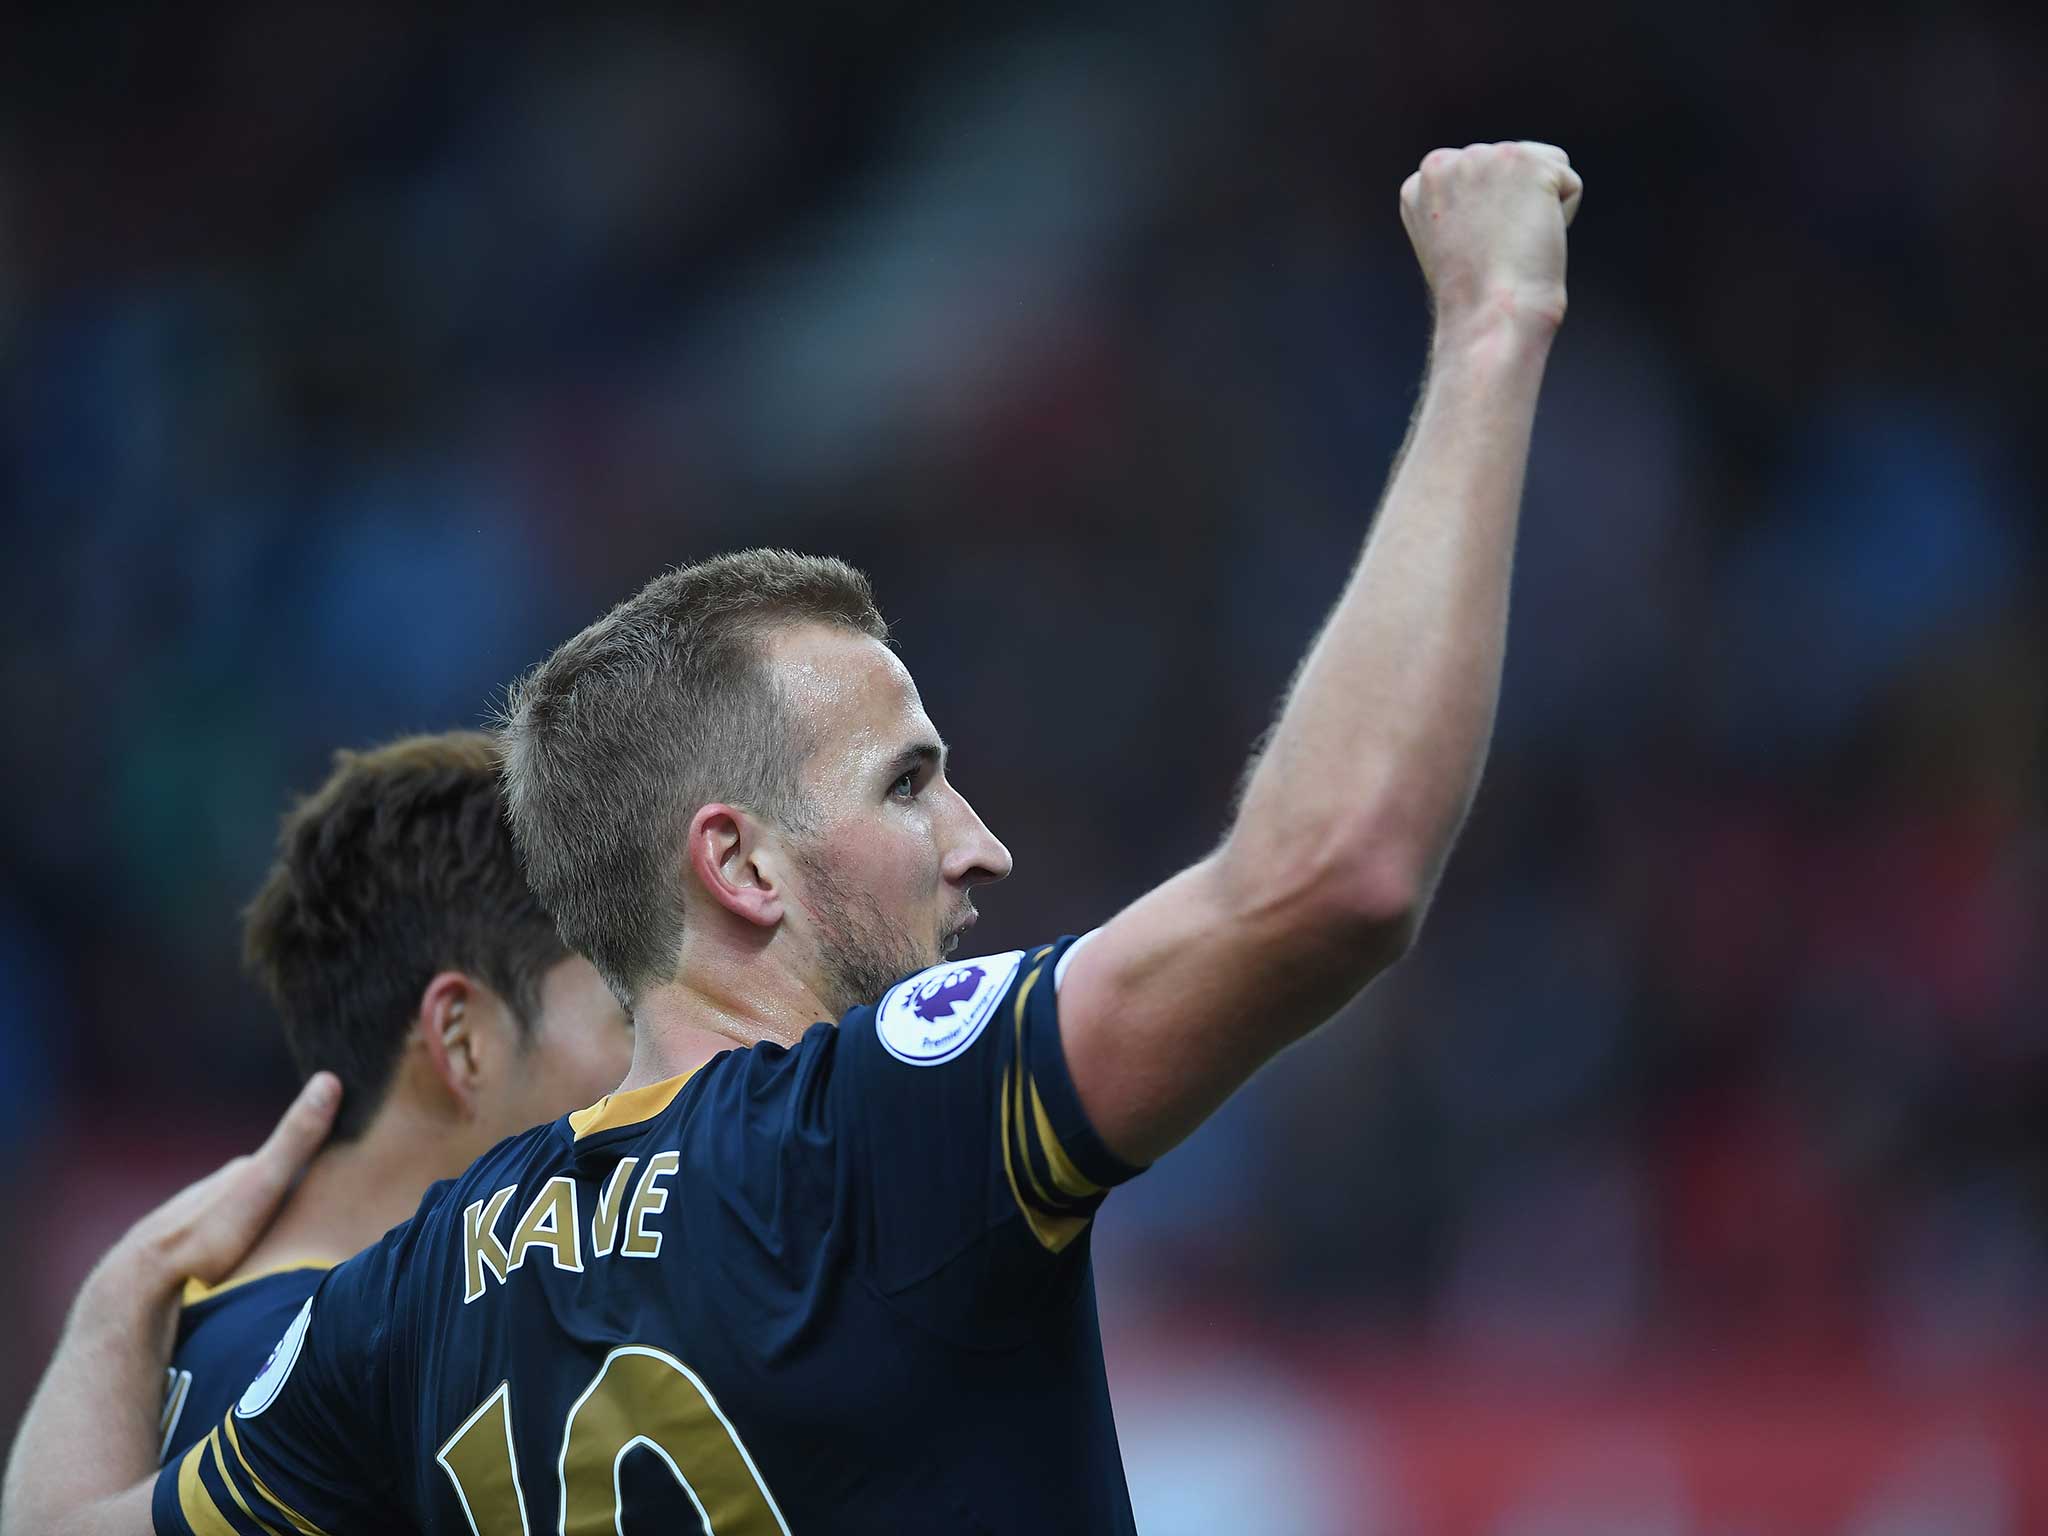 Harry Kane scored his first goal of the season at Stoke